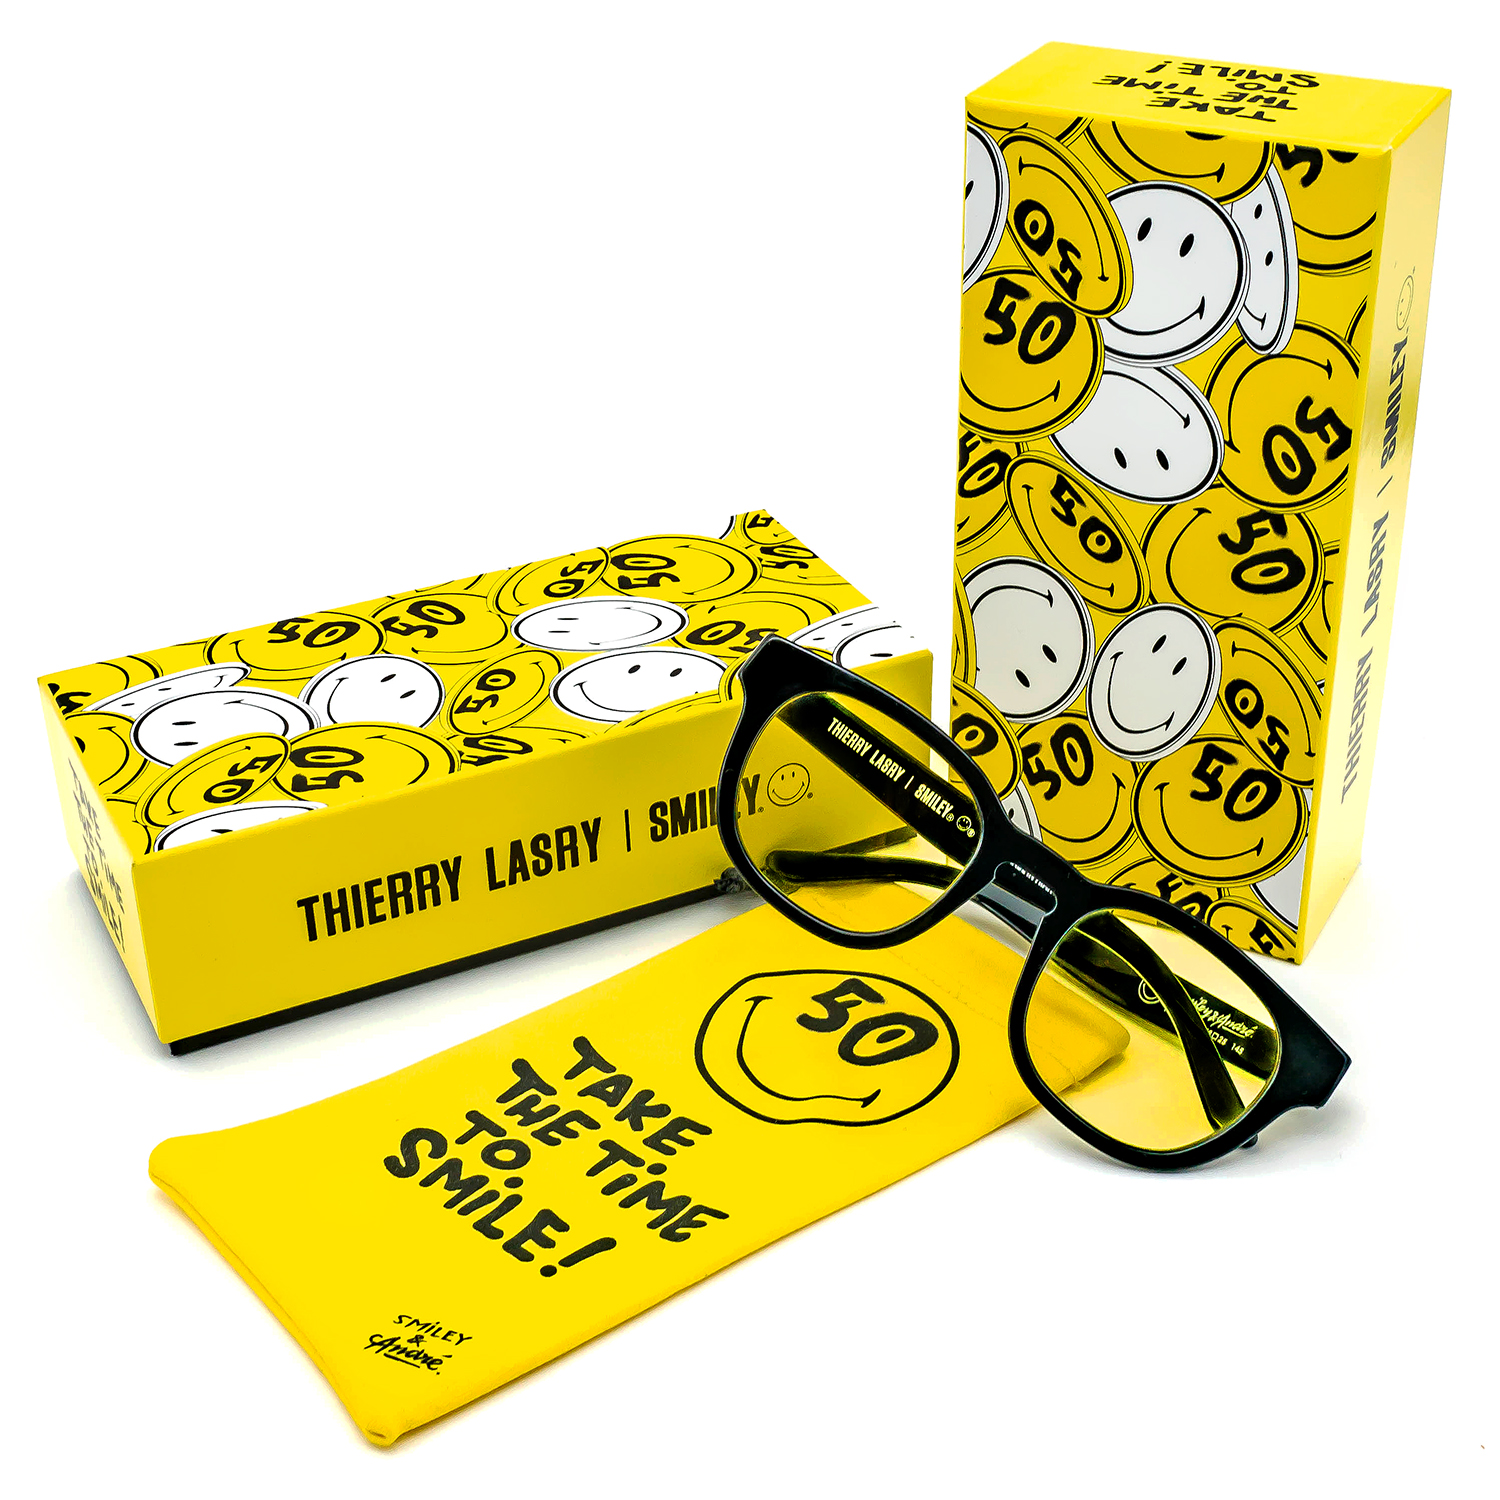 THIERRY LASRY x SMILEY® & ANDRÉ - HAPPY "THE COLLECTOR EDITION"